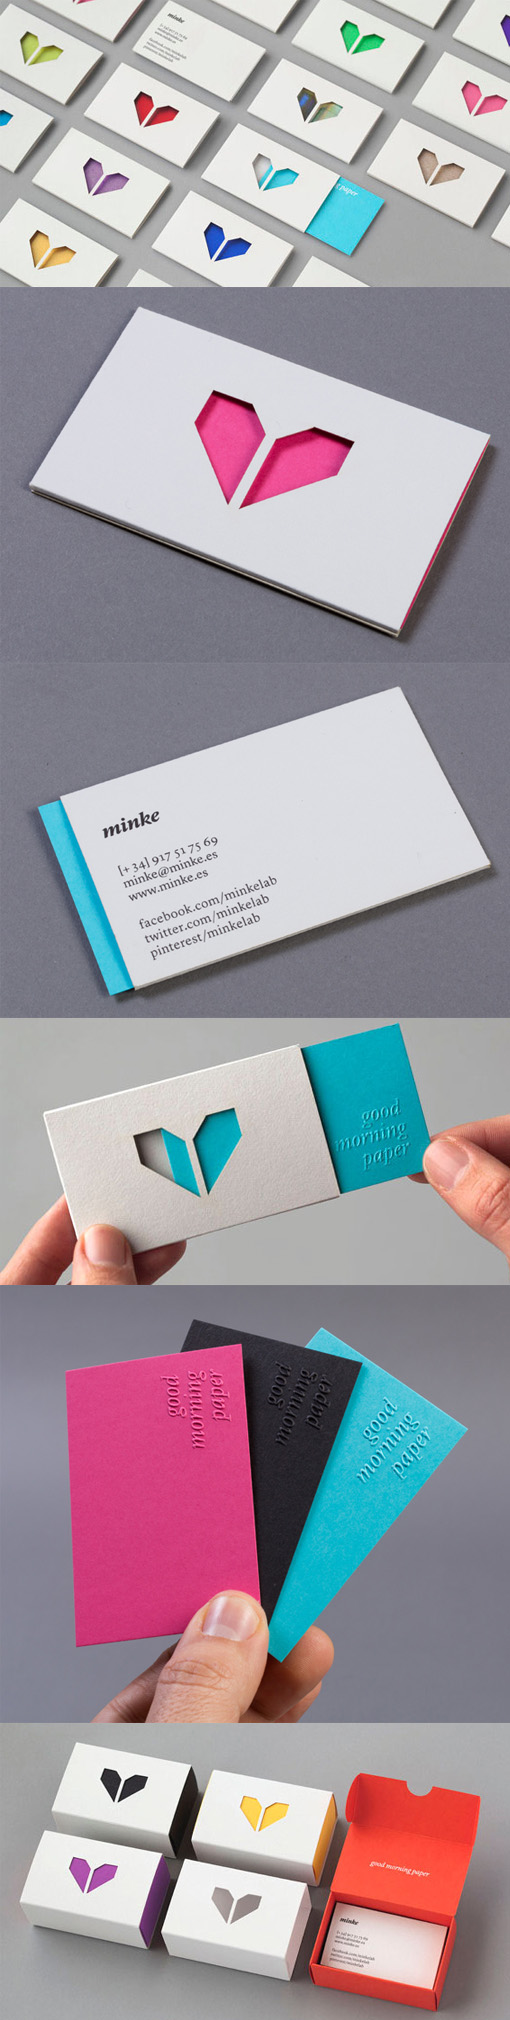 Clever Layered Interactive Die Cut Business Cards For A Print And Design Studio